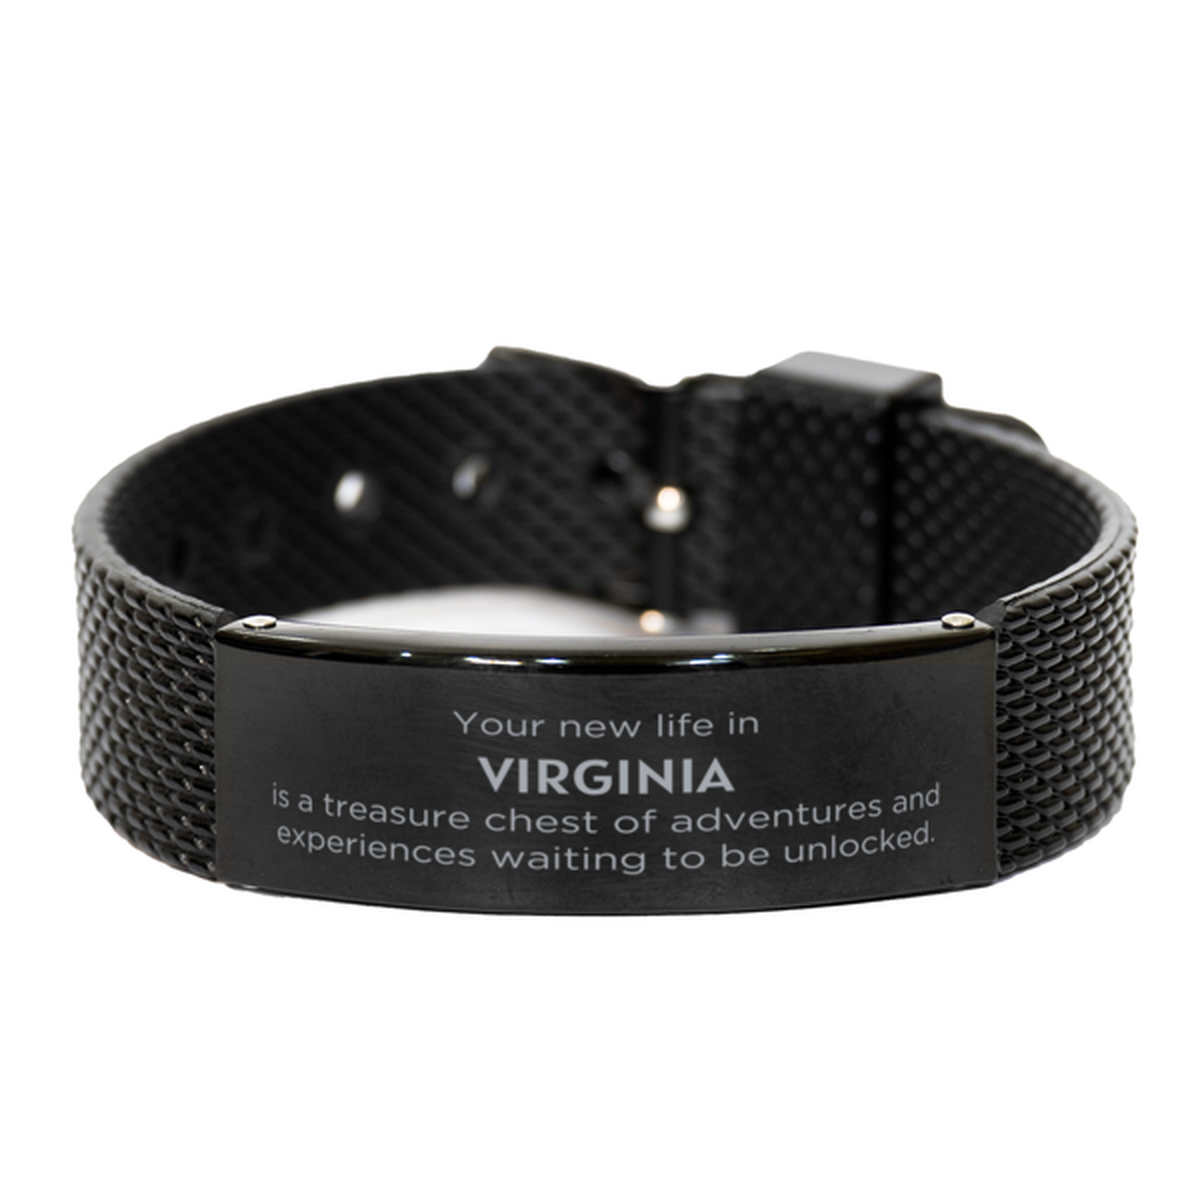 Moving to Virginia Gifts, Your new life in Virginia, Long Distance Virginia Christmas Black Shark Mesh Bracelet For Men, Women, Friends, Coworkers